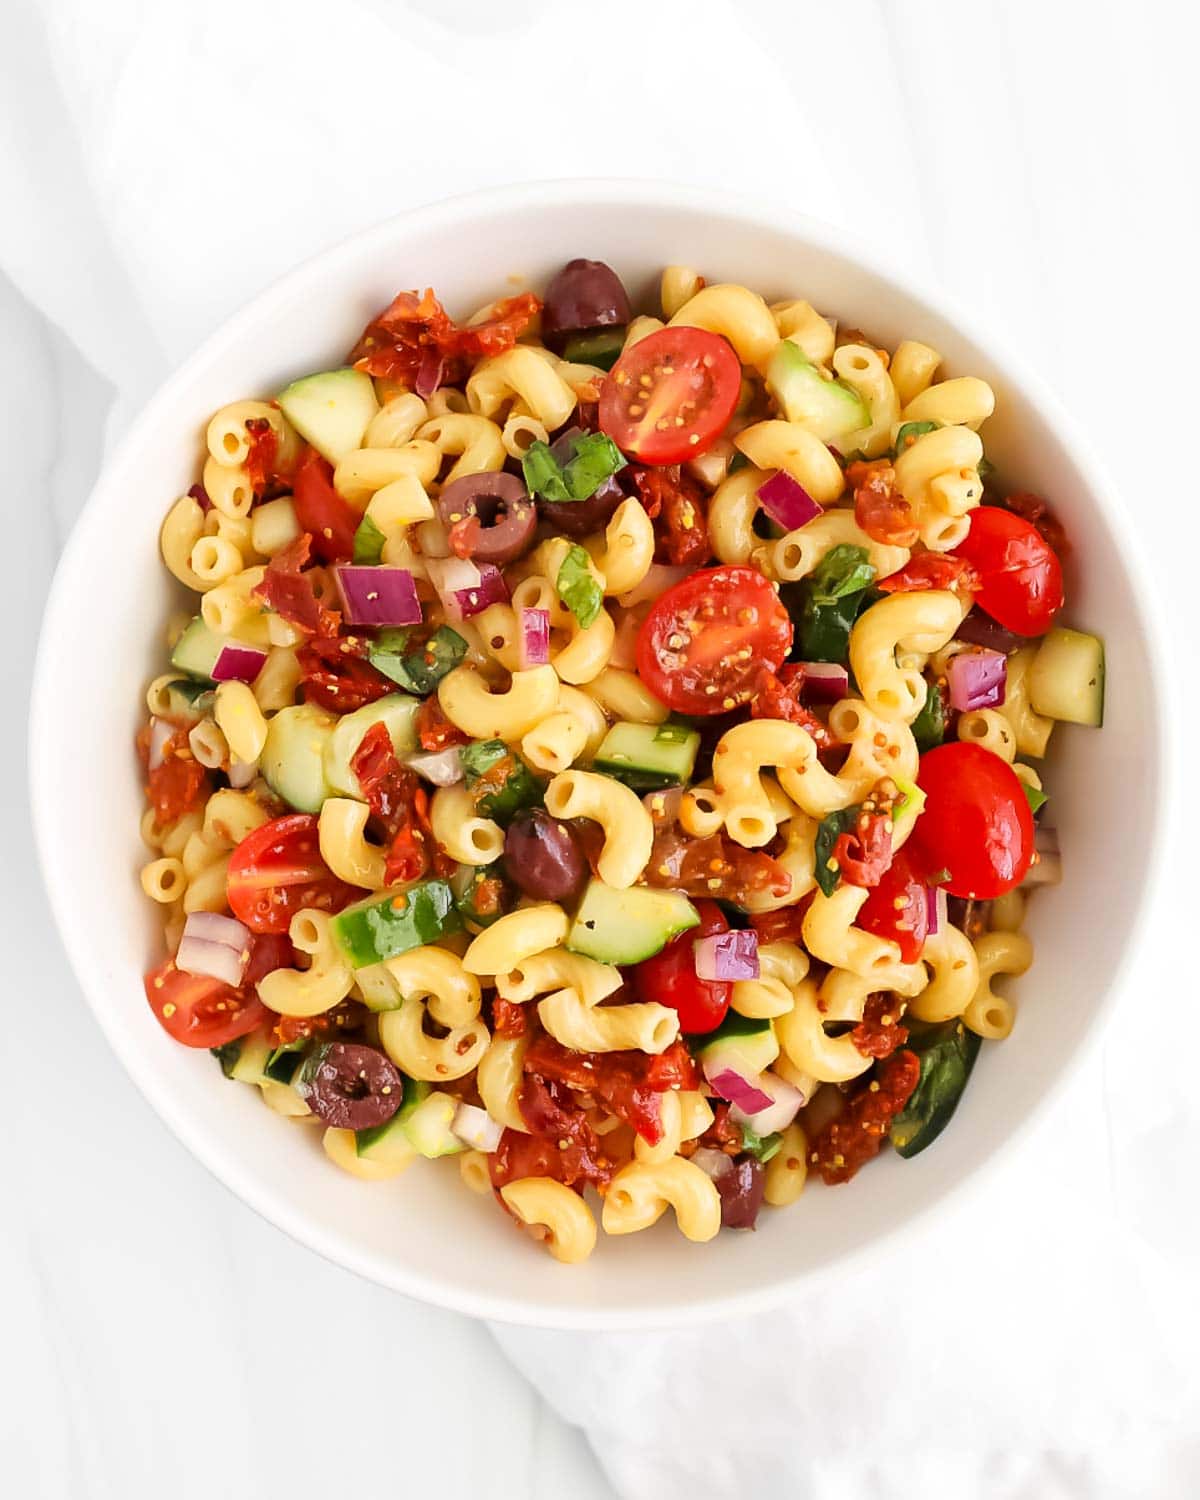 An overhead image of pasta salad in a white bowl.